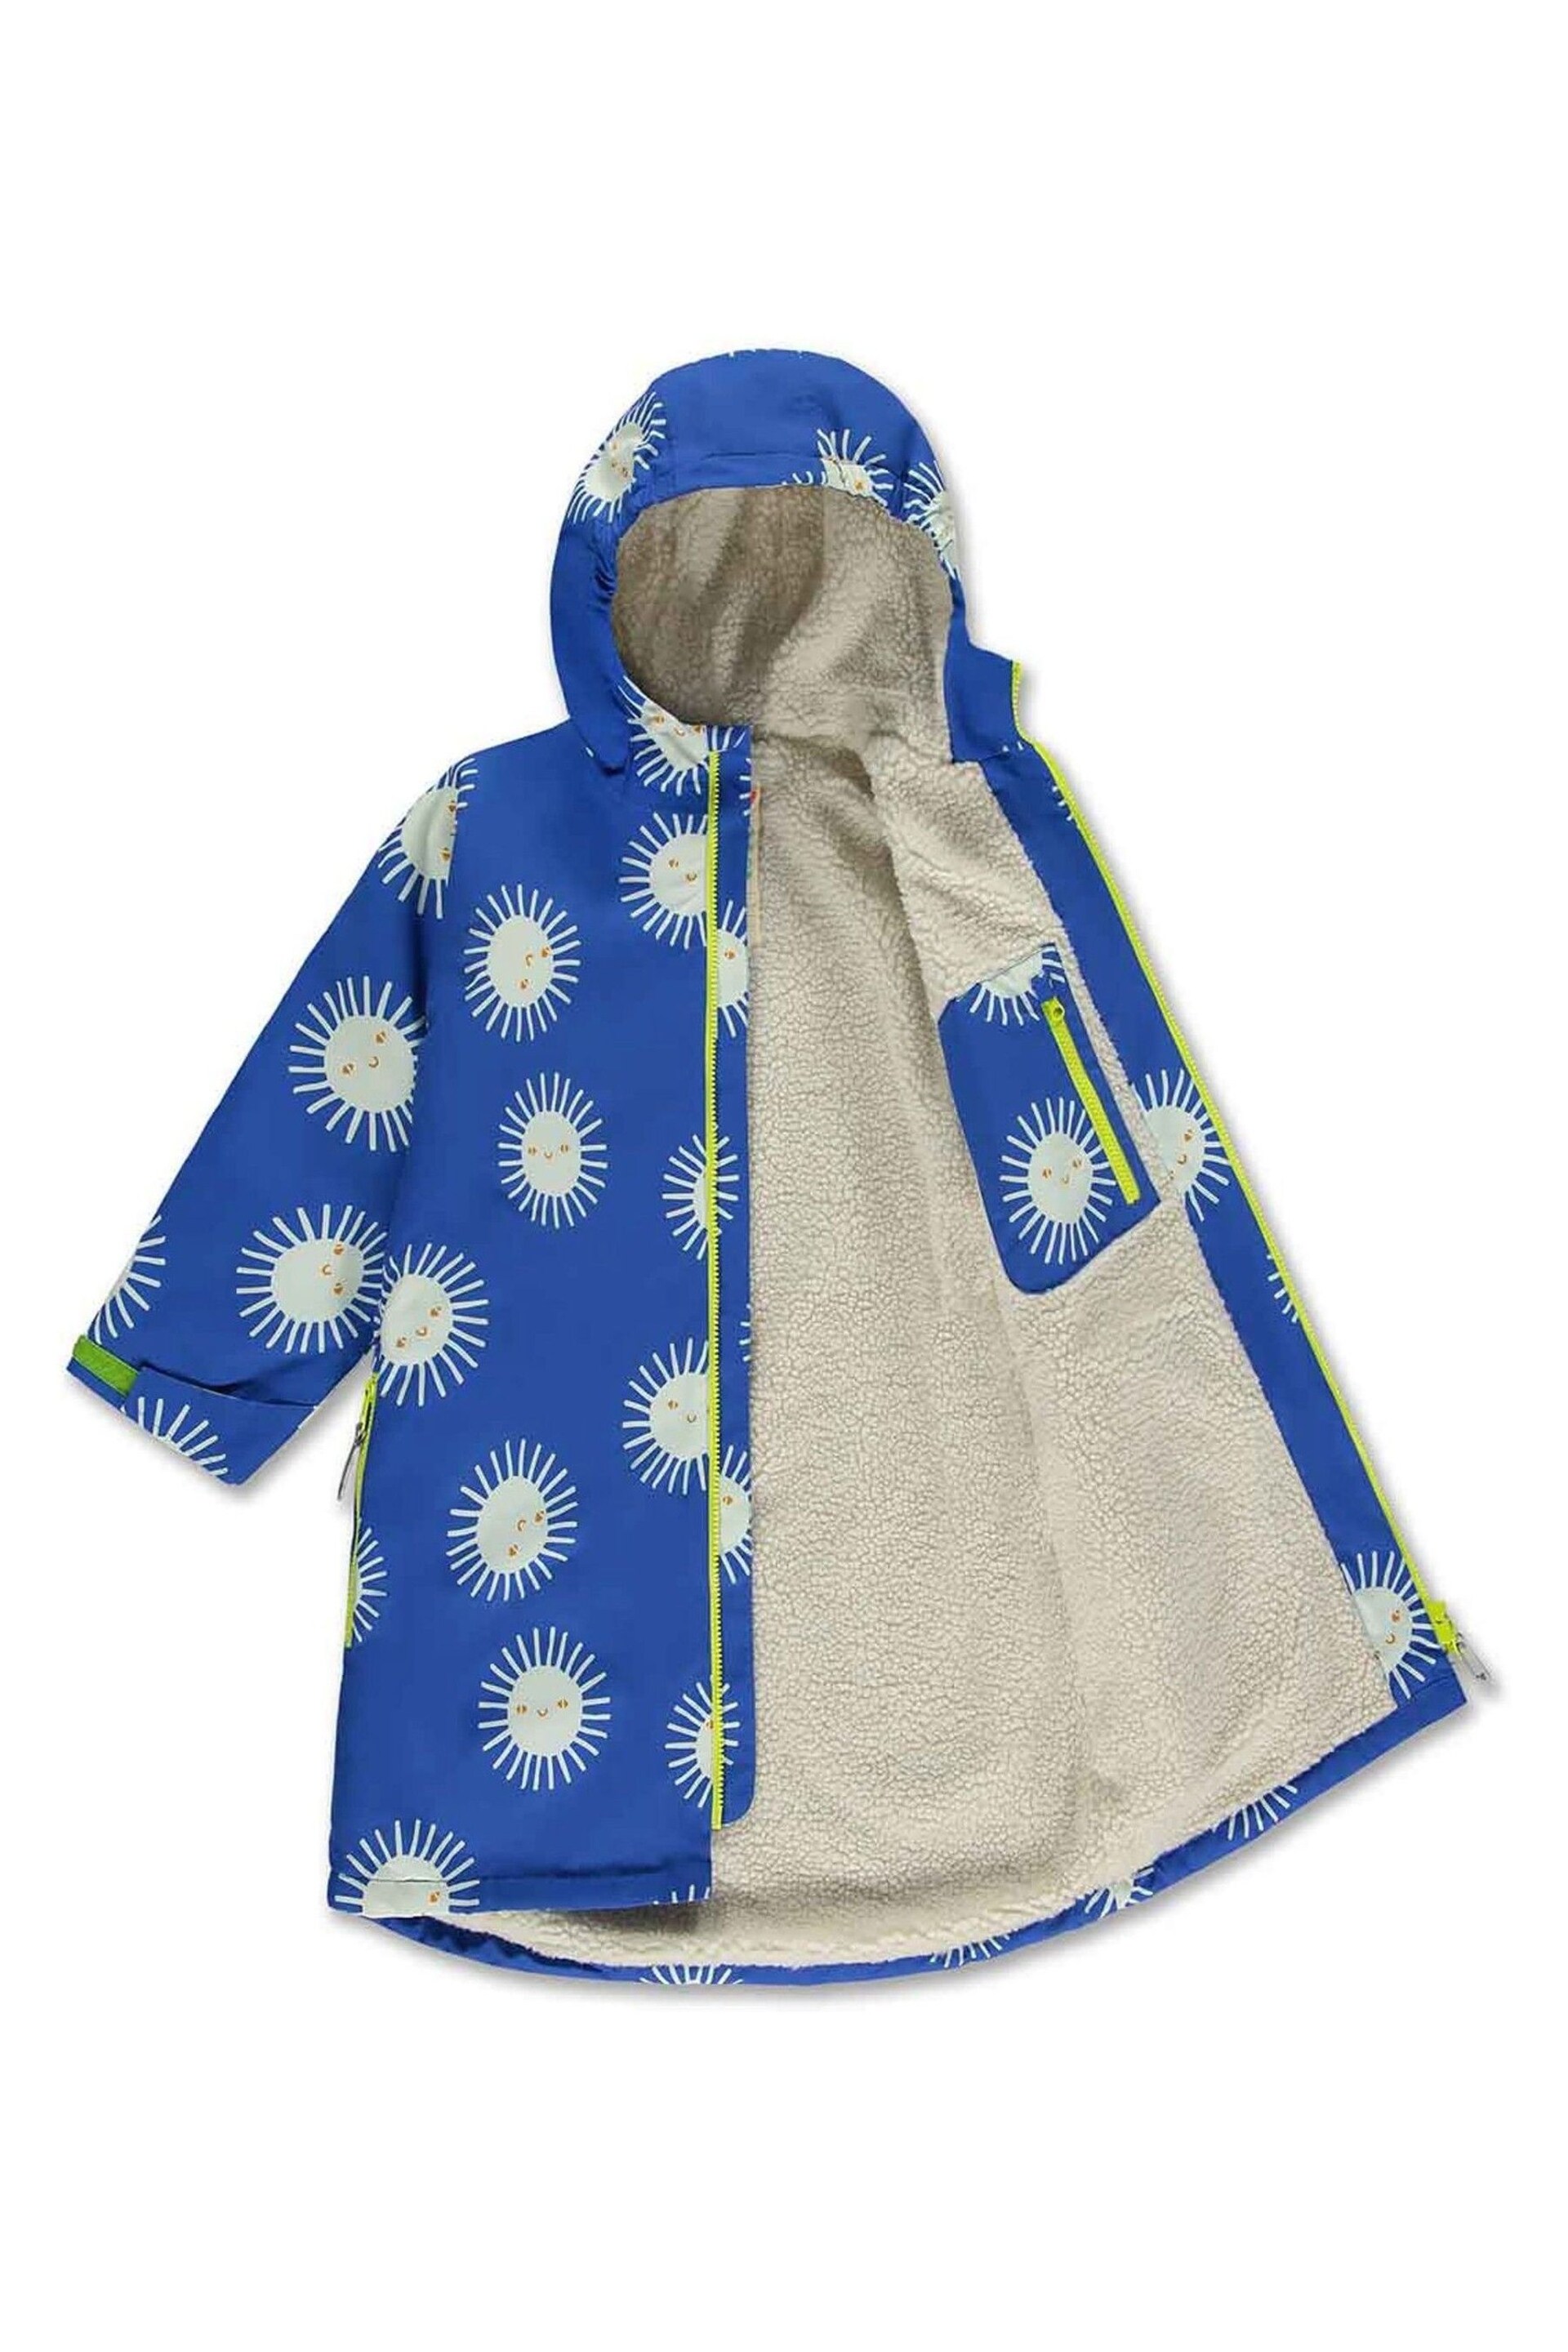 Muddy Puddles Blue Recycled Waterproof Changing Robe Cover-Up - Image 2 of 4